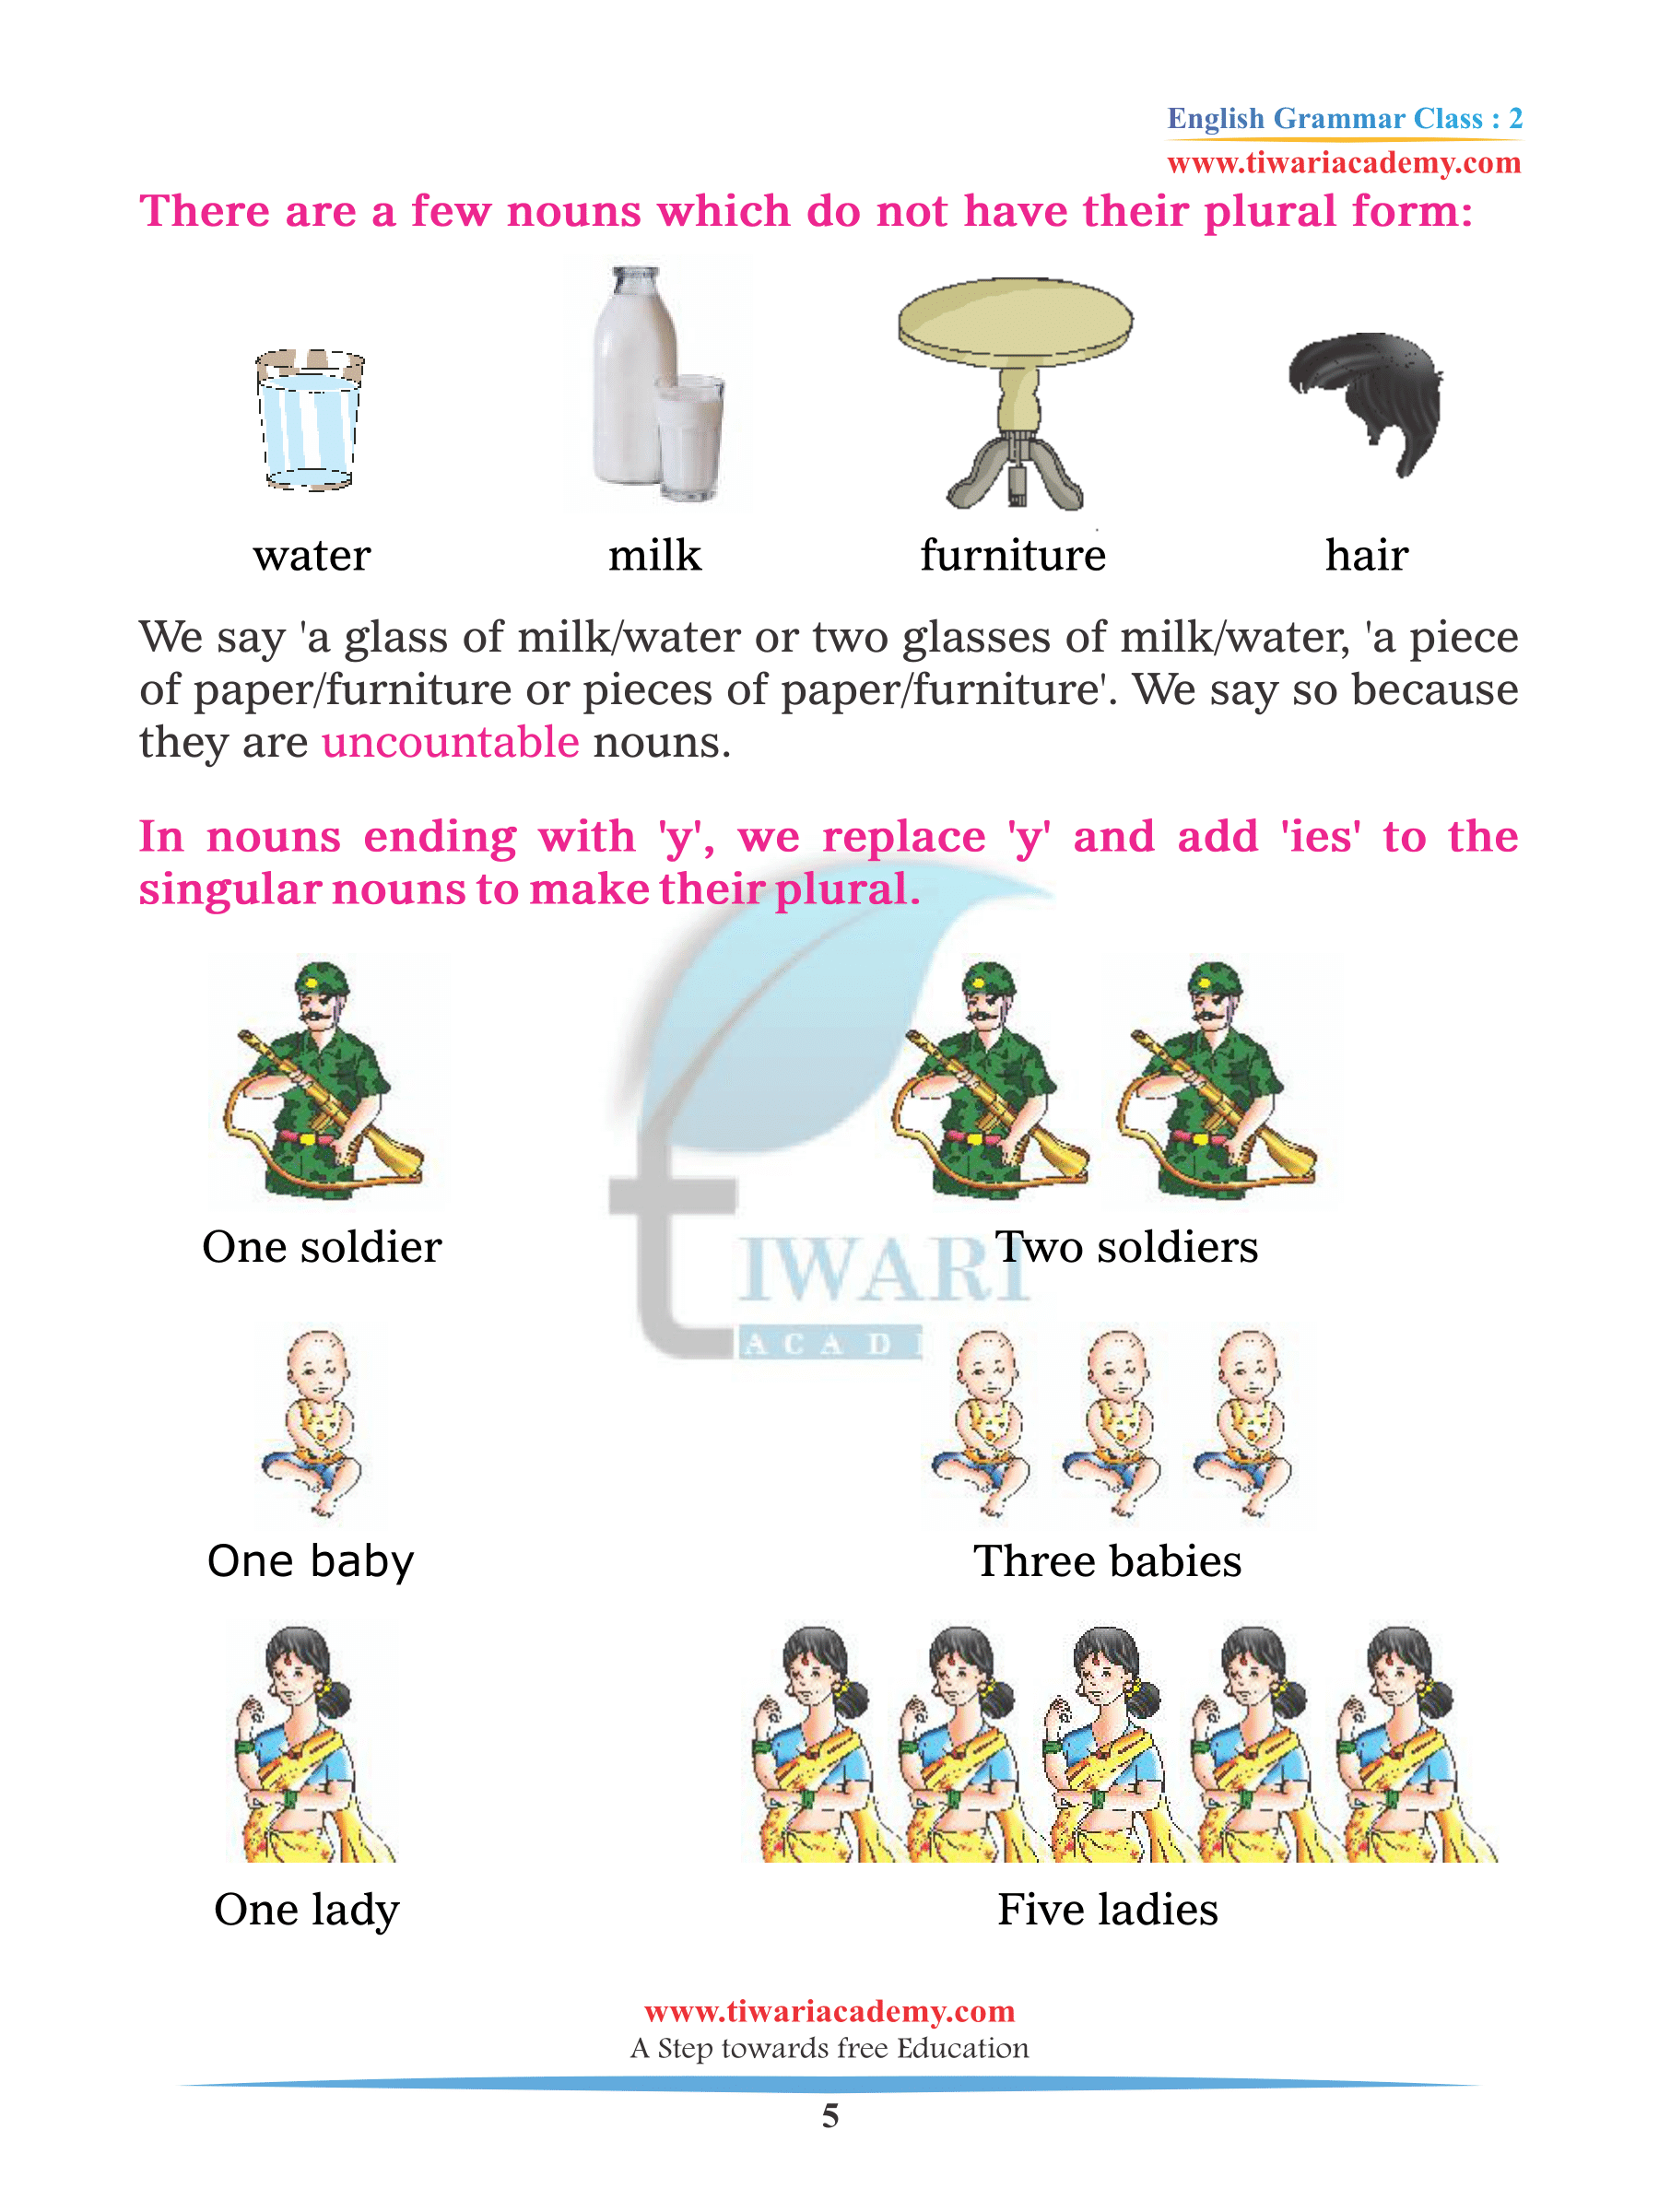 Class 2 English Grammar Chapter 2 Singular and Plural and Assignments.